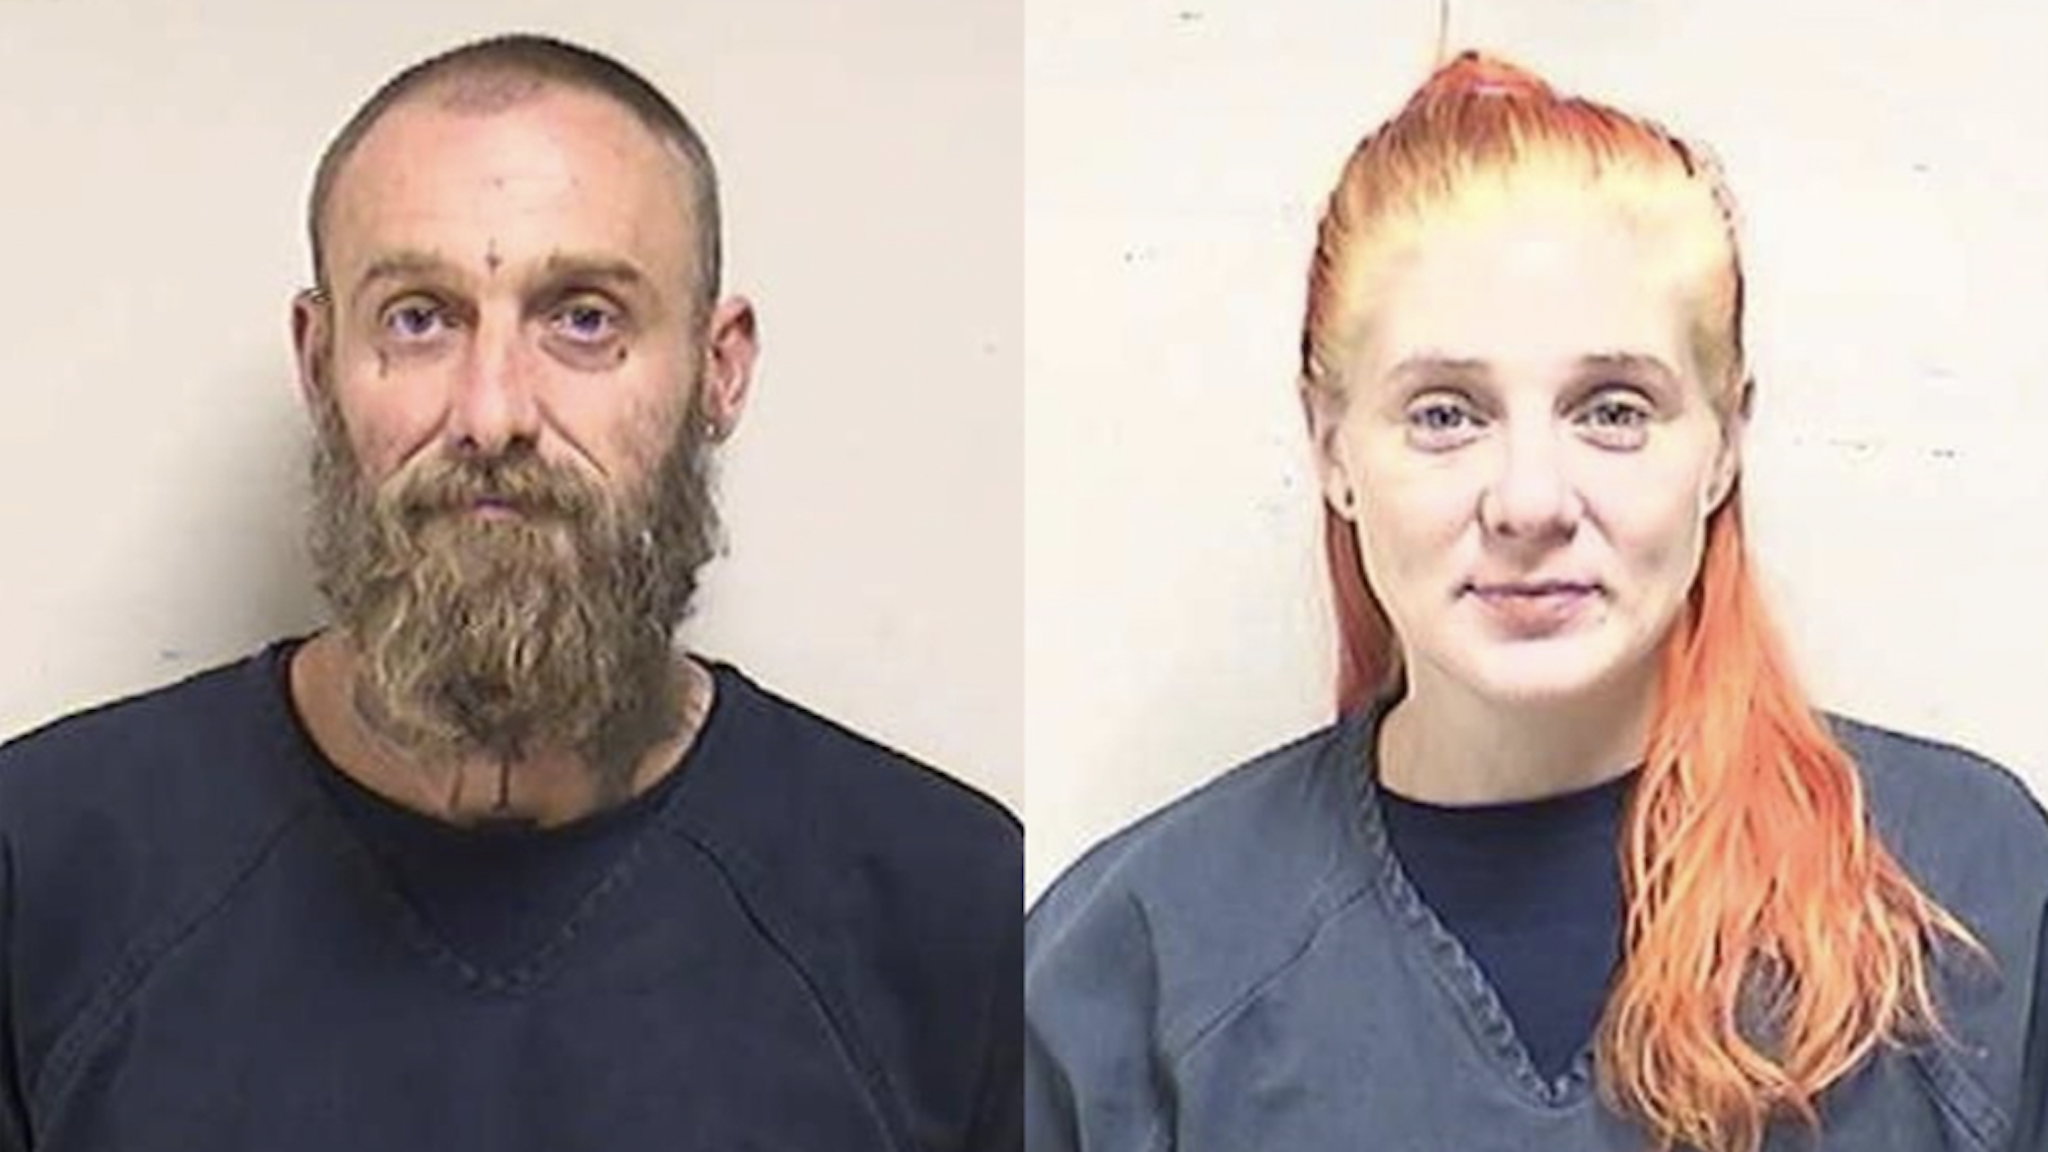 Joshua and Kelly Ziminski have been charged with new crimes even as he awaits trial for his role in the 2020 Kenosha riot.